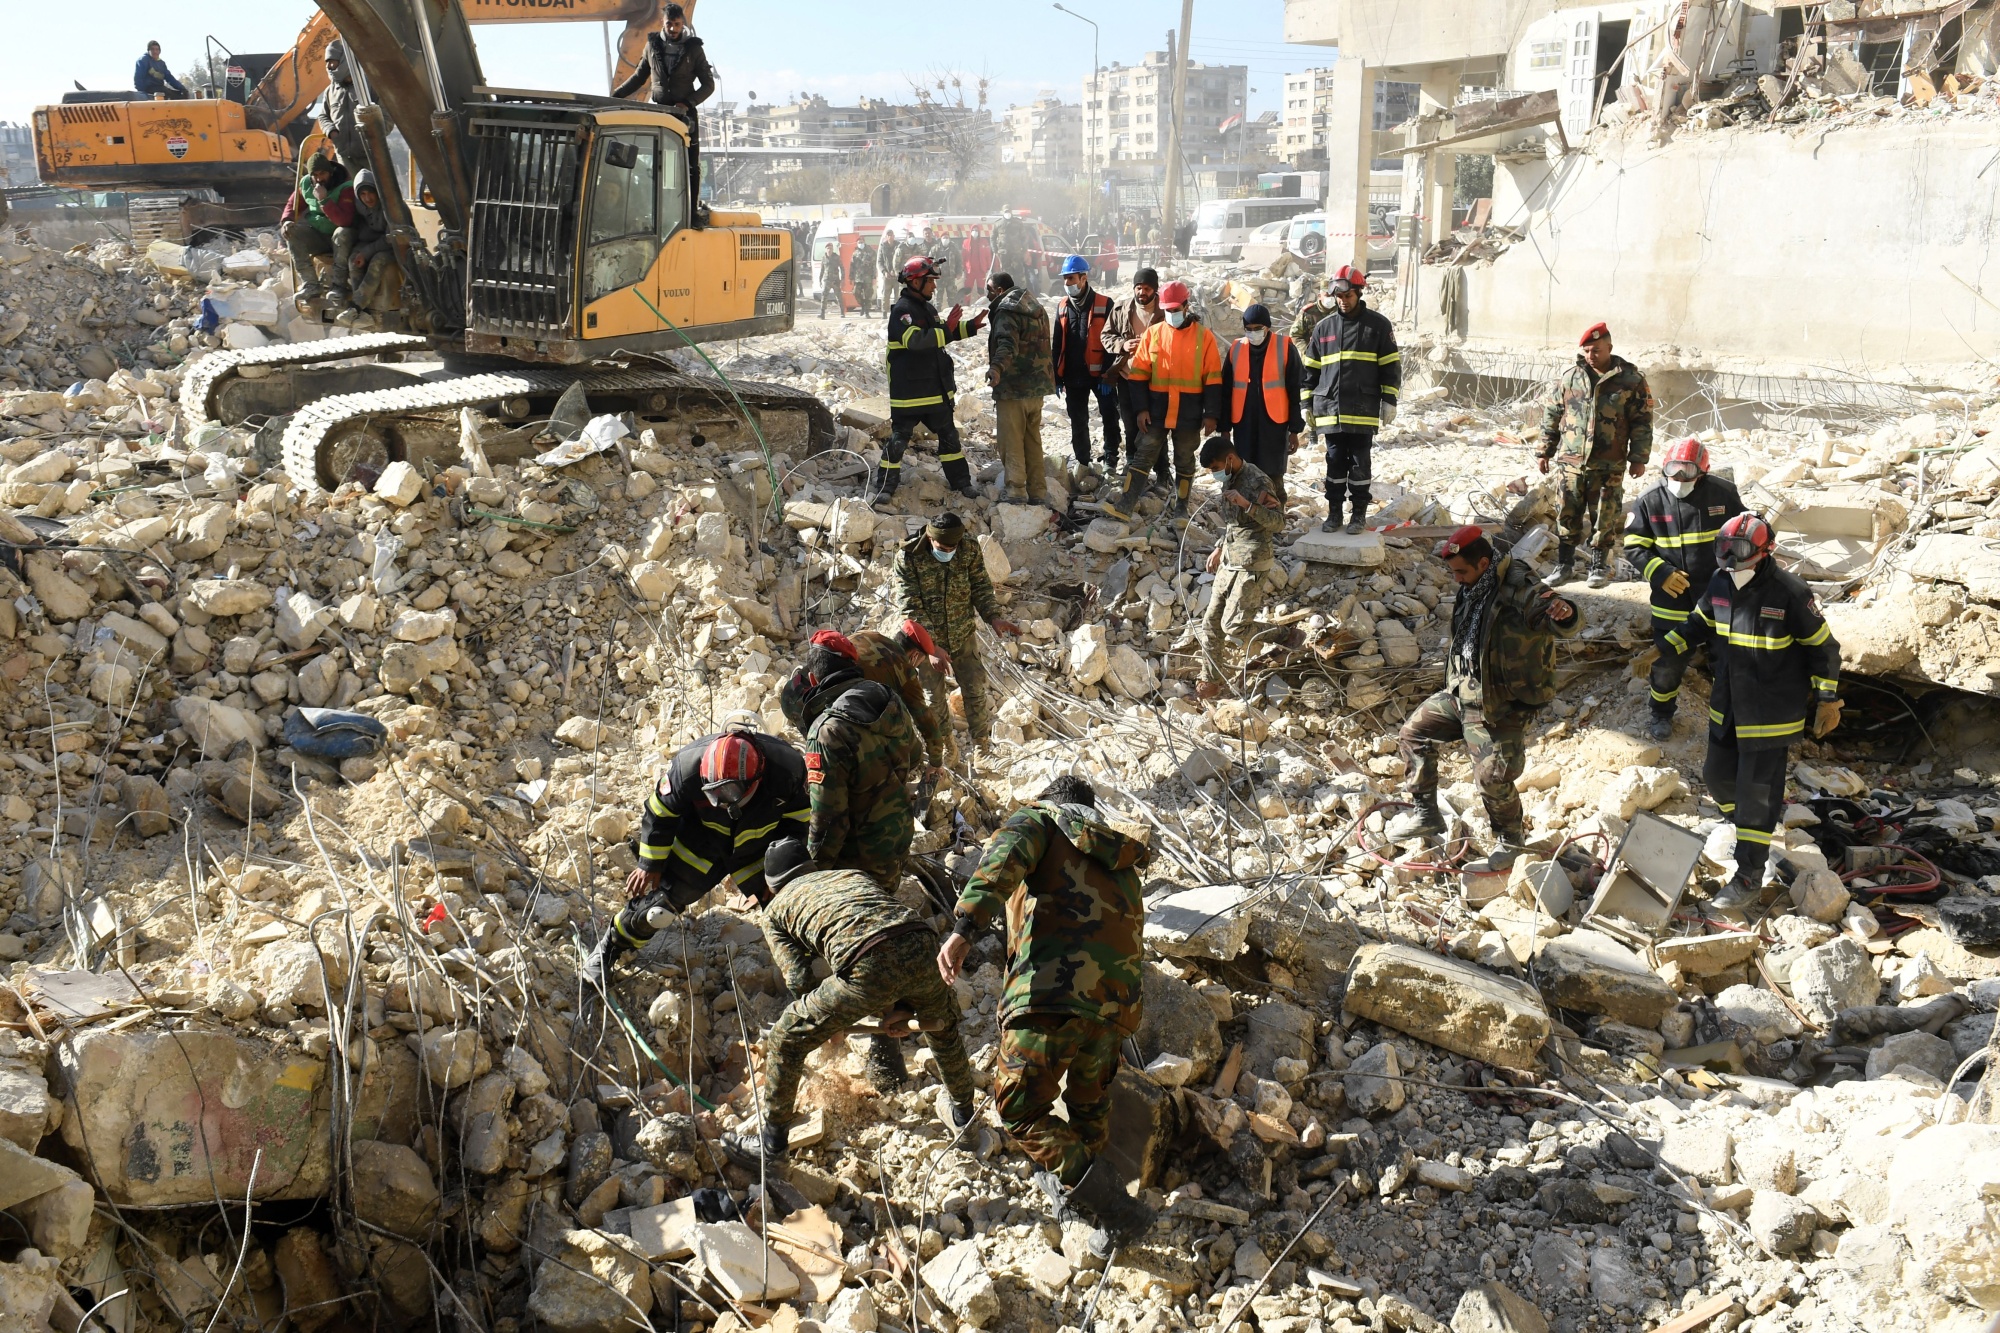 Rescuers search through the rubble.